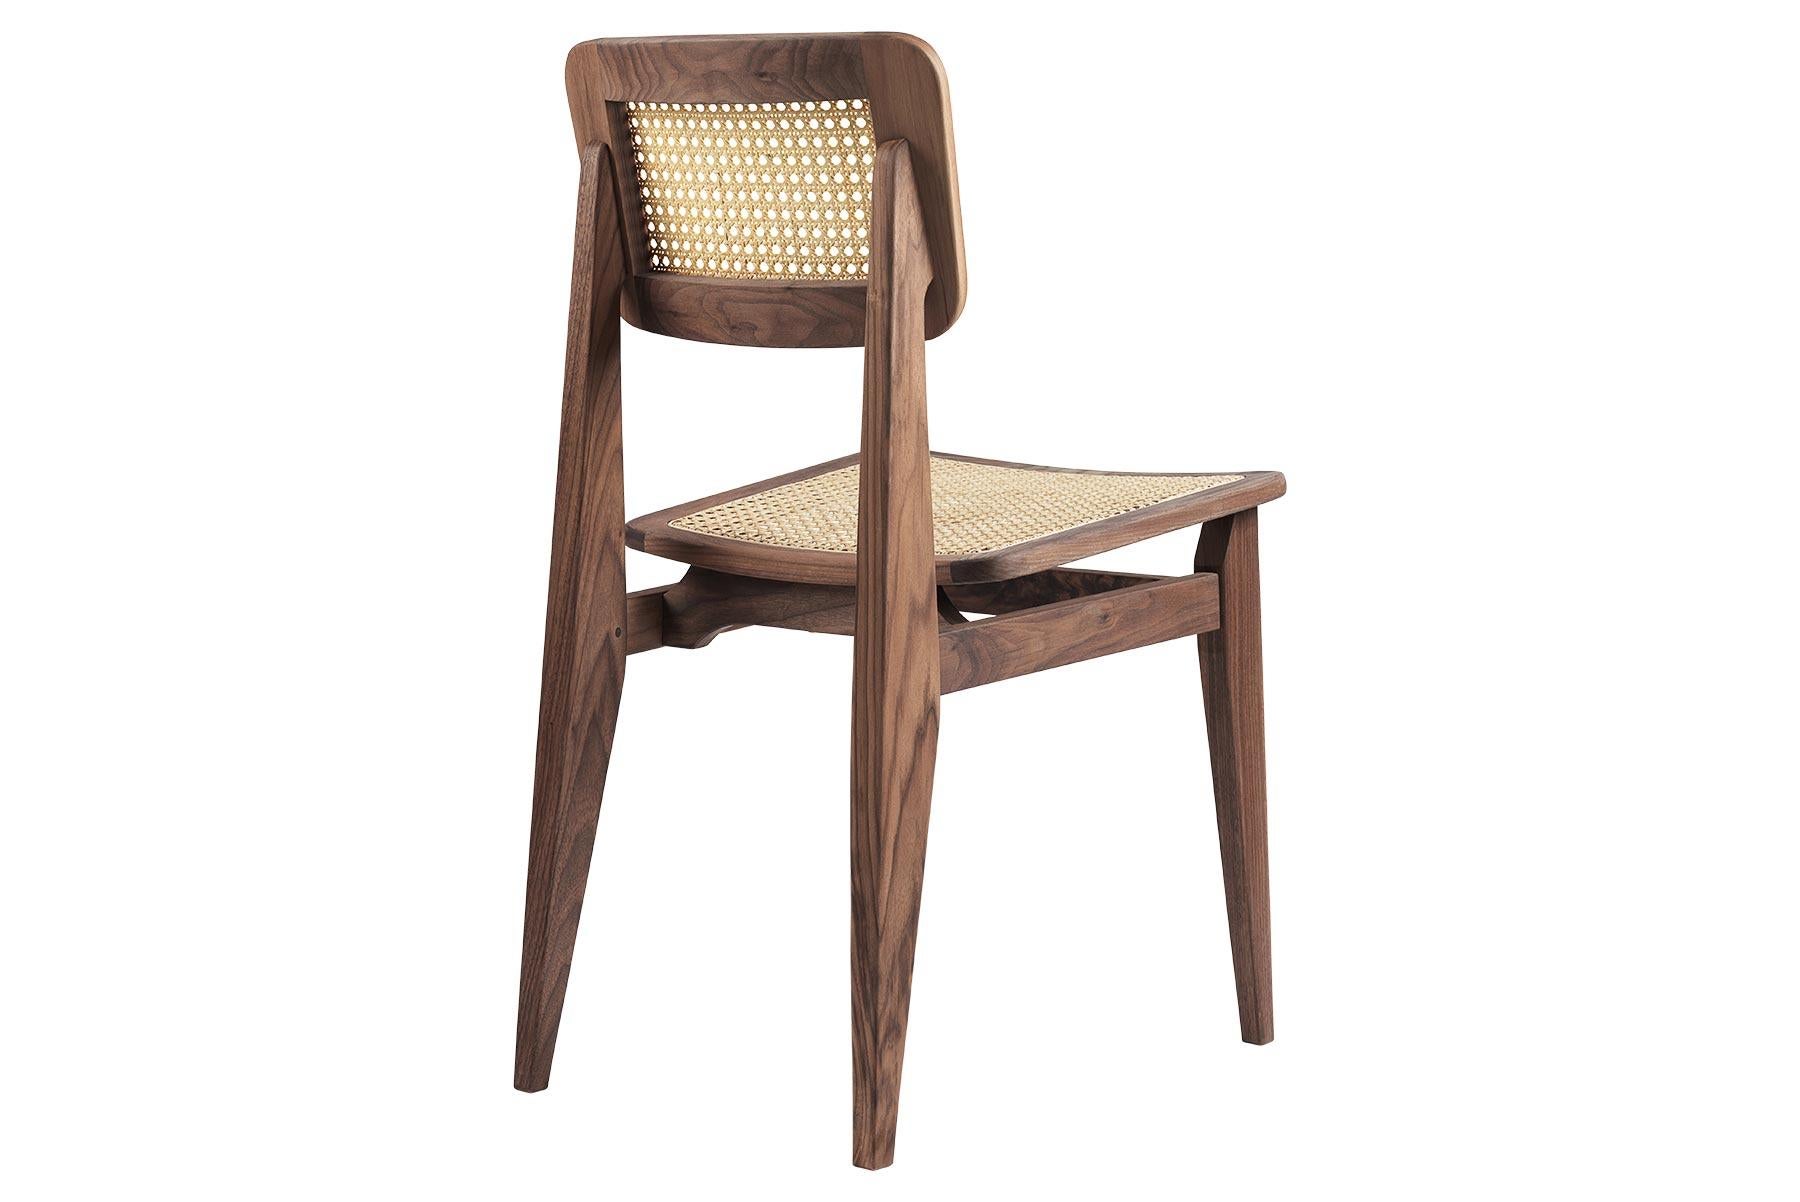 Mid-Century Modern C-Chair Dining Chair, French Cane, Brown Stained Oak For Sale